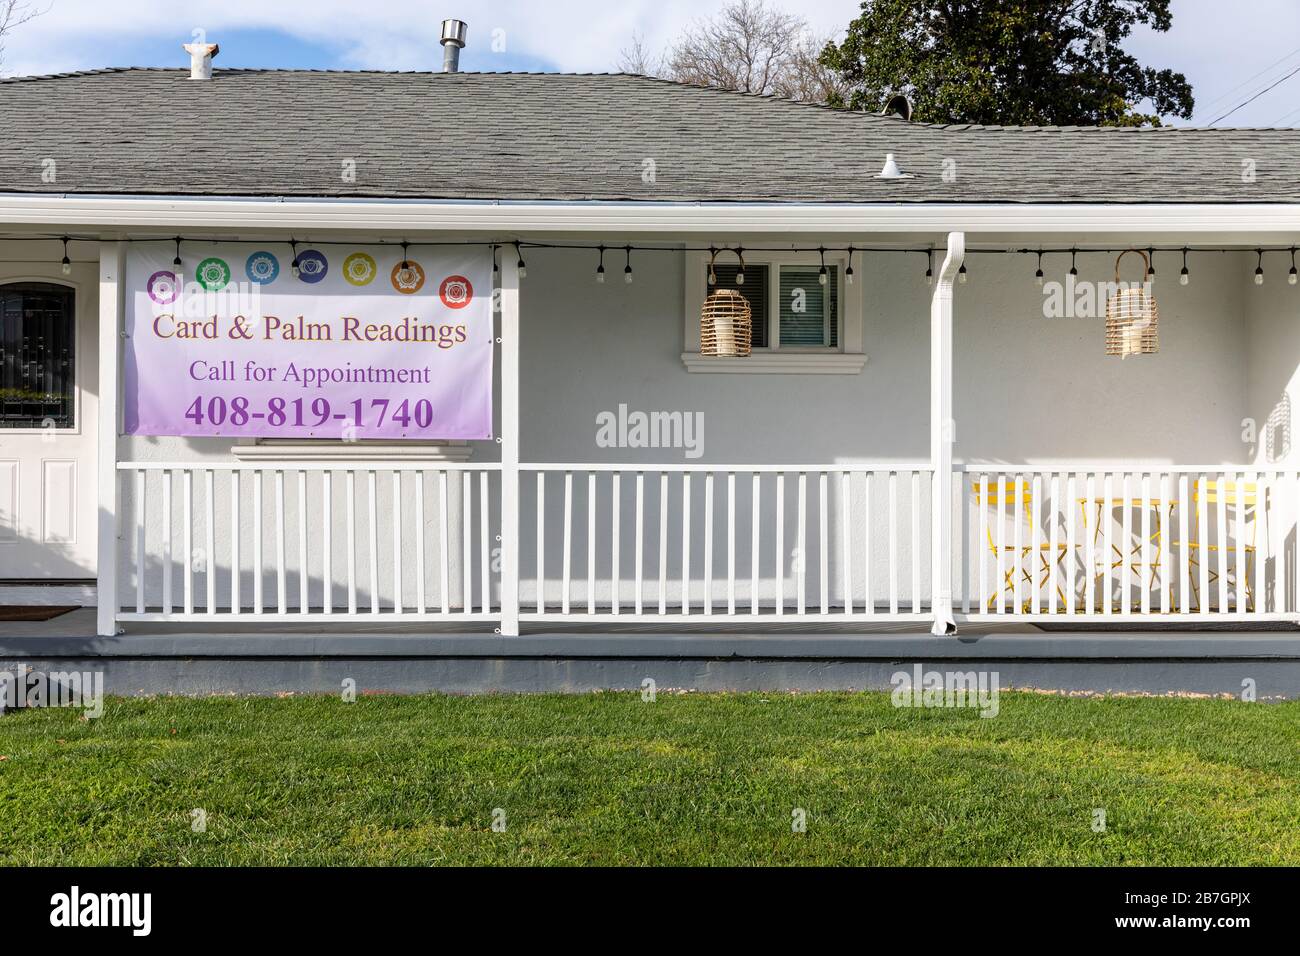 Card & Palm Readings, Call for Appointment, sign on house in San José, California, USA Stock Photo